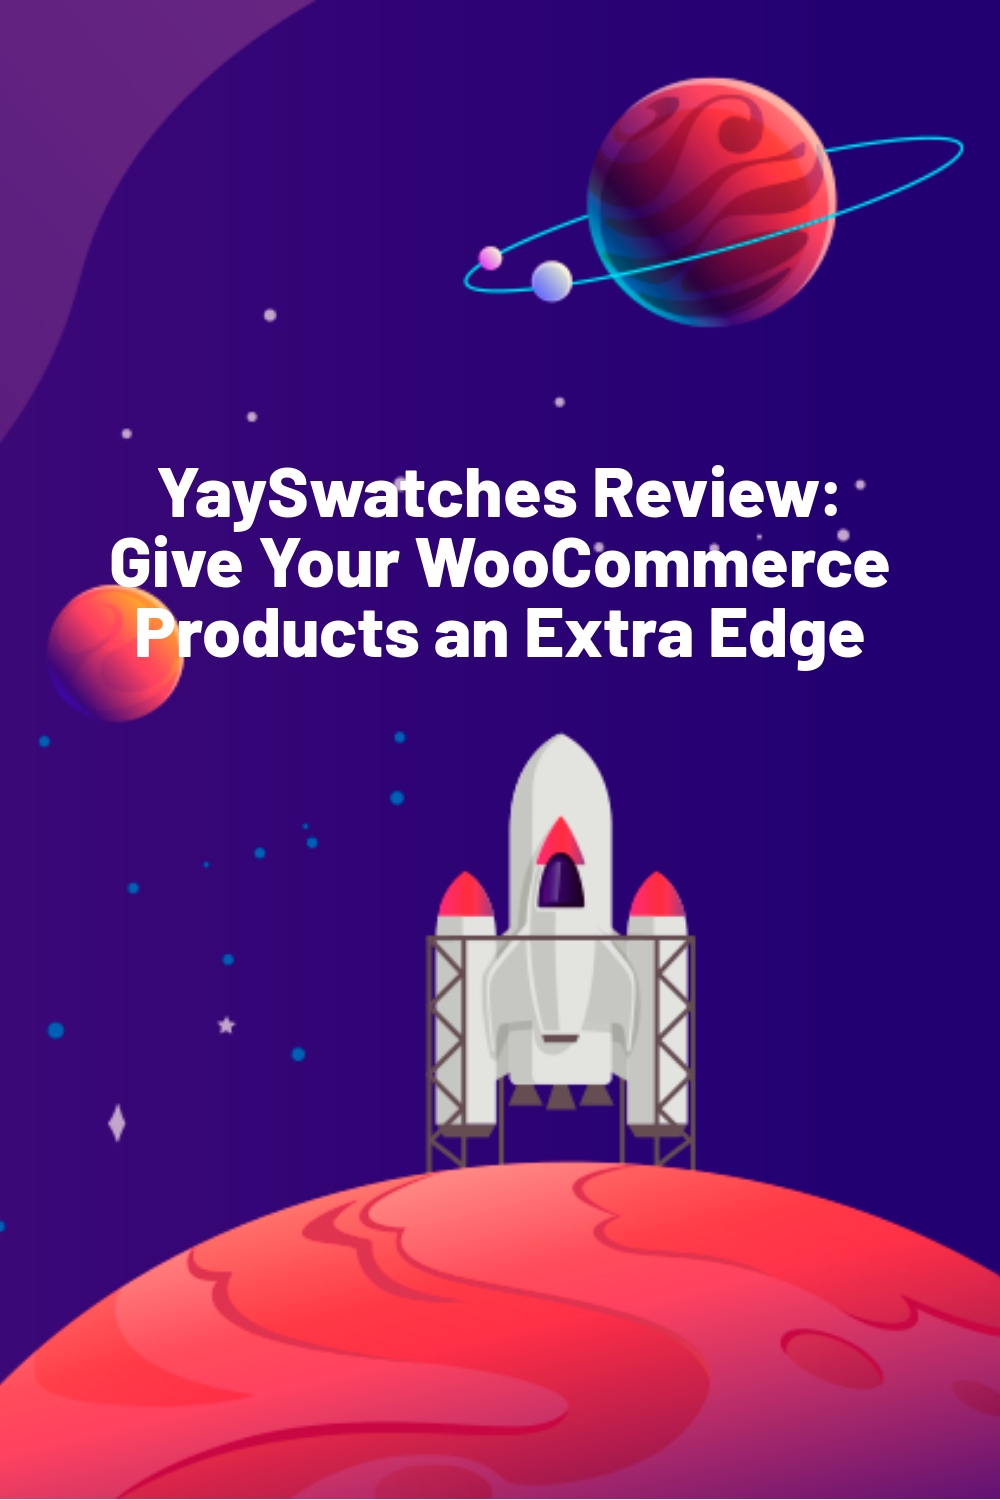 YaySwatches Review: Give Your WooCommerce Products an Extra Edge